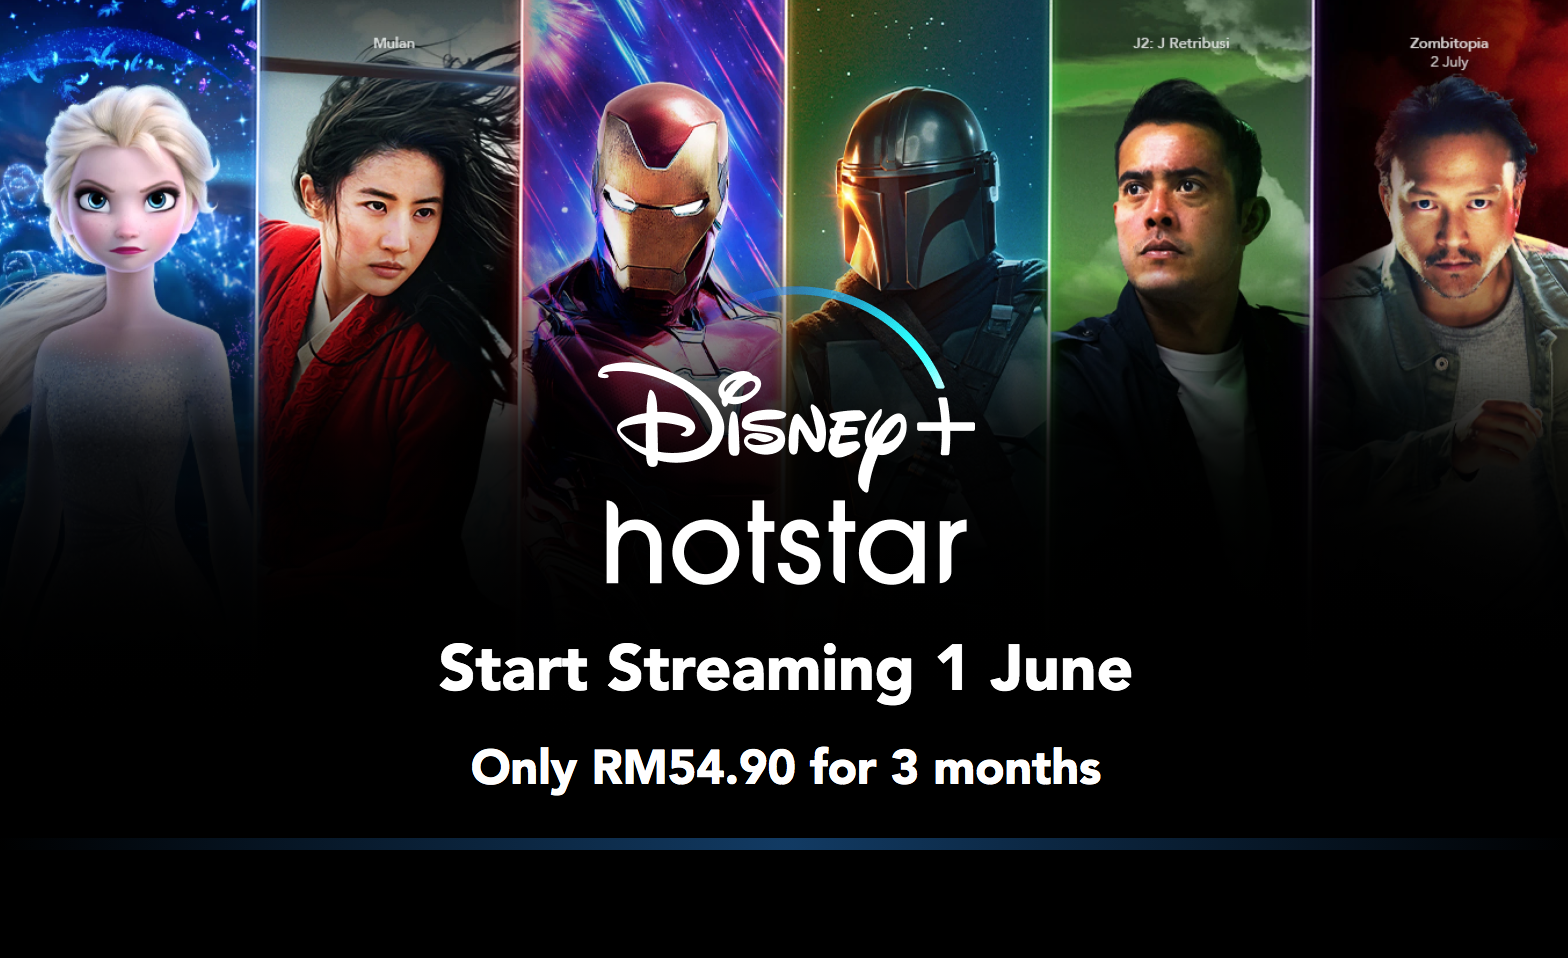 Disney Plus Hotstar Launches in M'sia on 1st June